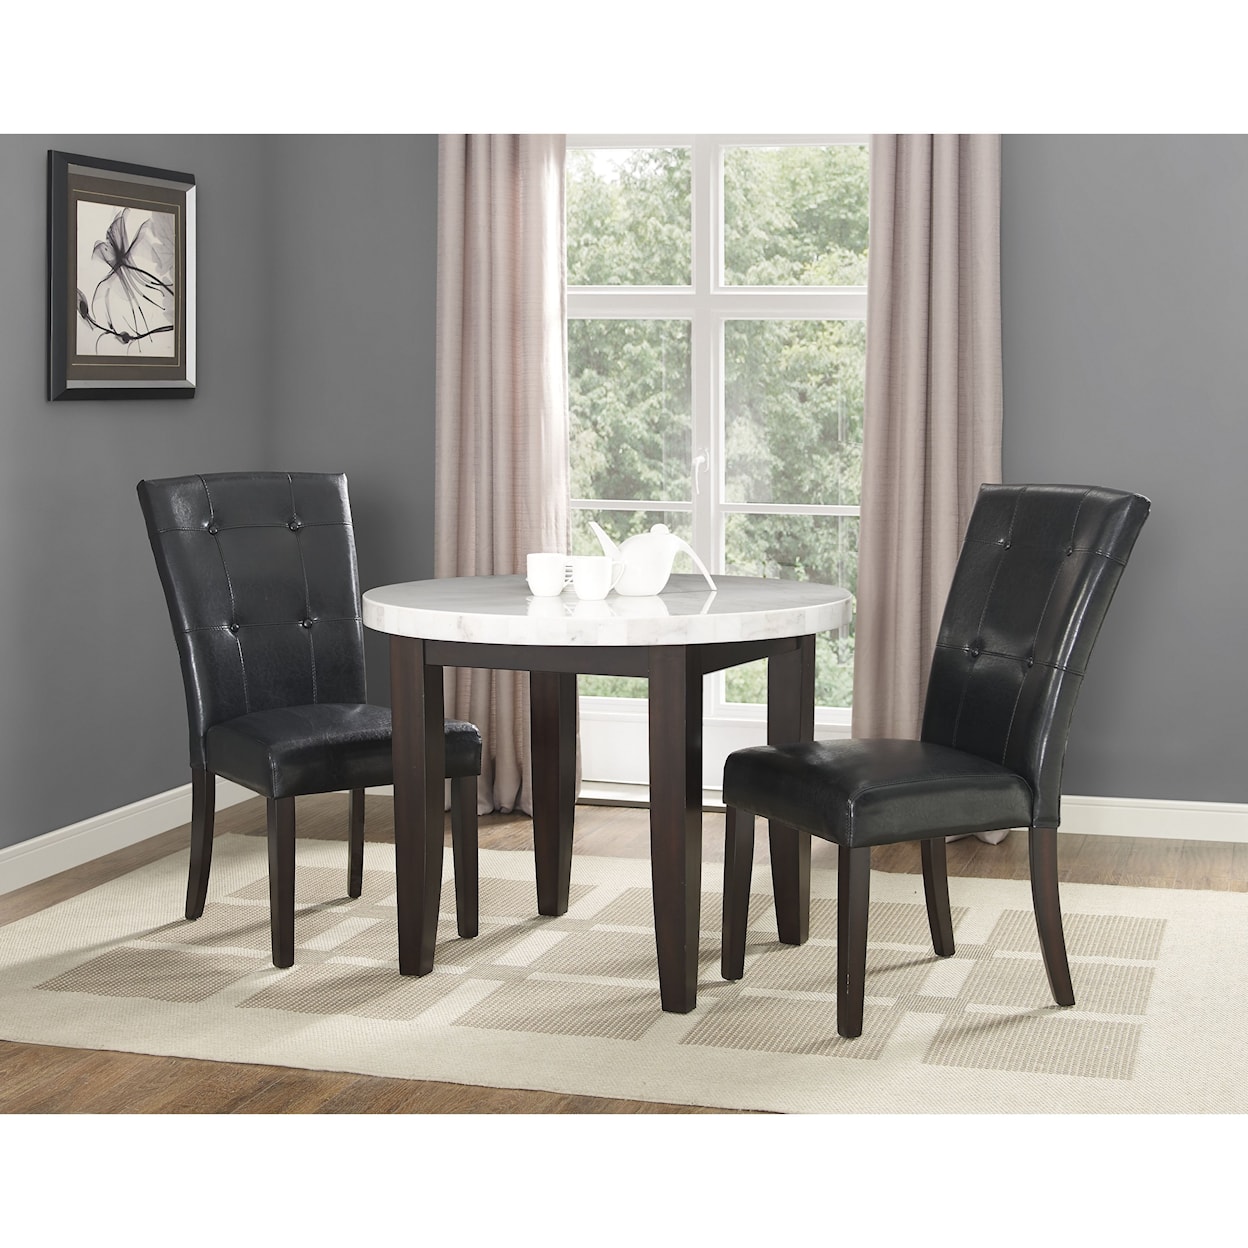 Steve Silver Francis 3 Piece Table and Chair Set